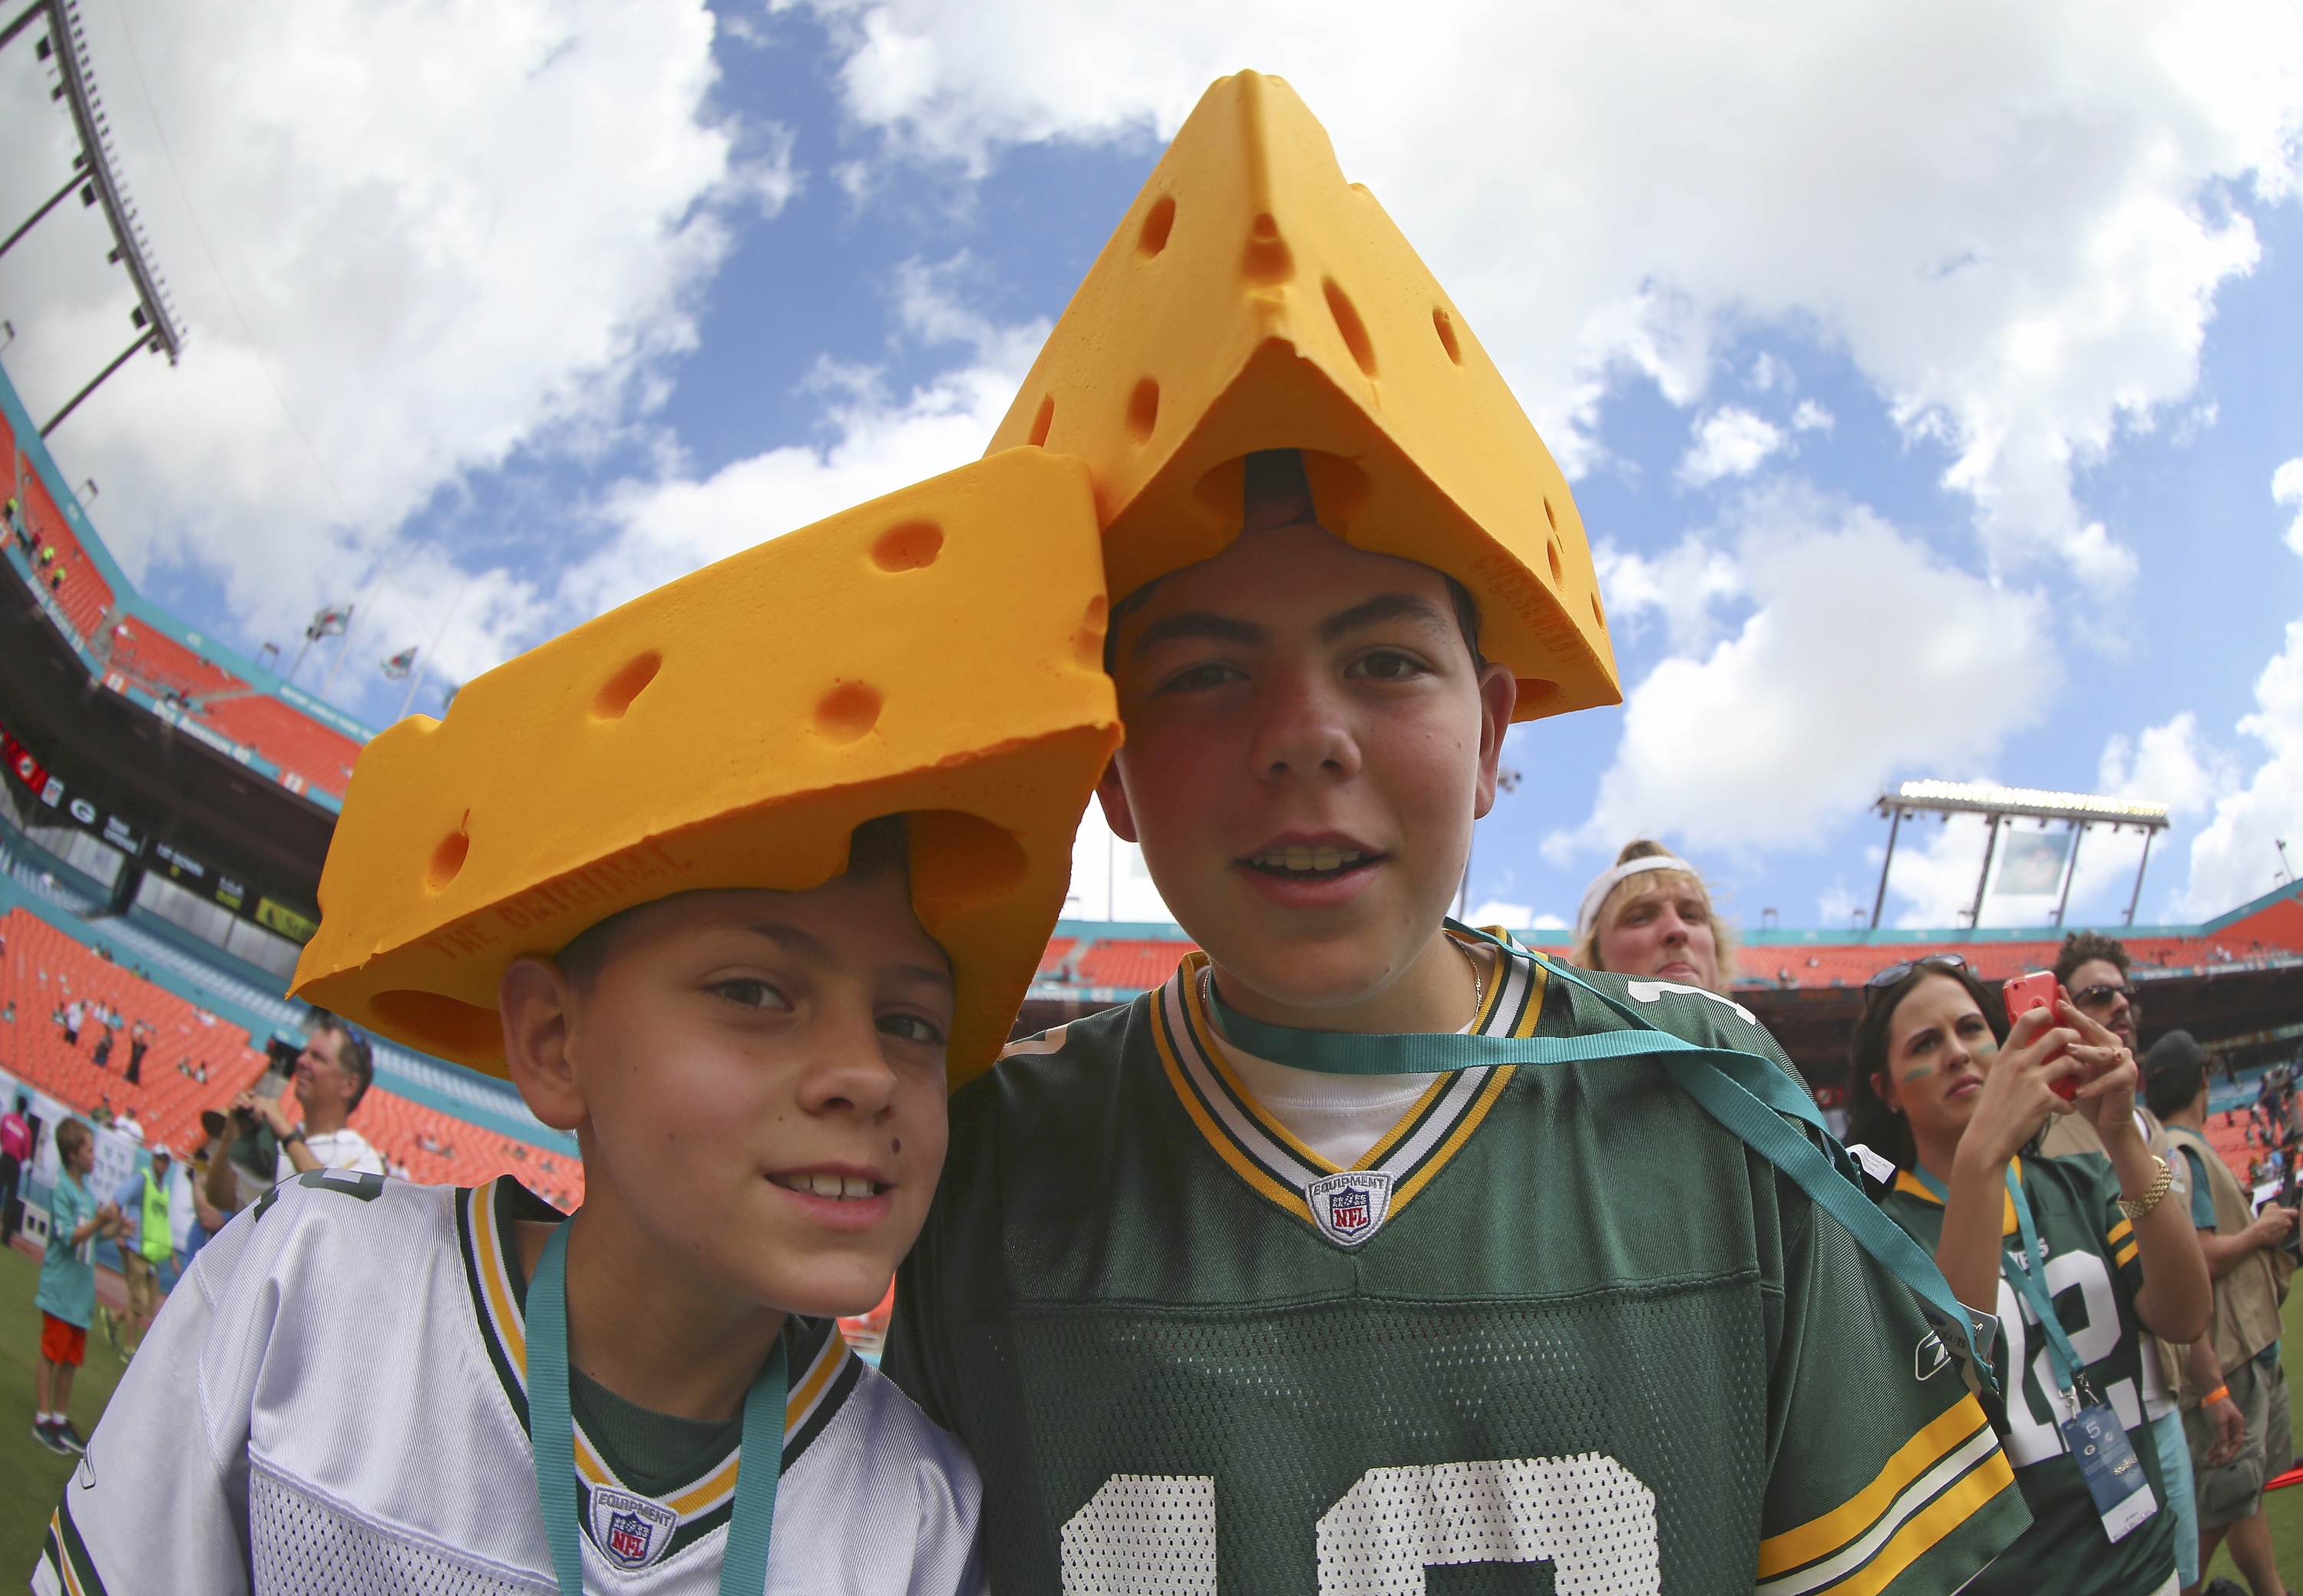 MIAMI GARDENS, FL - OCTOBER 12:  Green Bay Packers fans wear cheese headgear before the Miami Dolphins met the Green Bay Packers in their NFL game at Sun Life Stadium on October 12, 2014 in Miami Gardens, Florida.  (Photo by Mike Ehrmann/Getty Images)